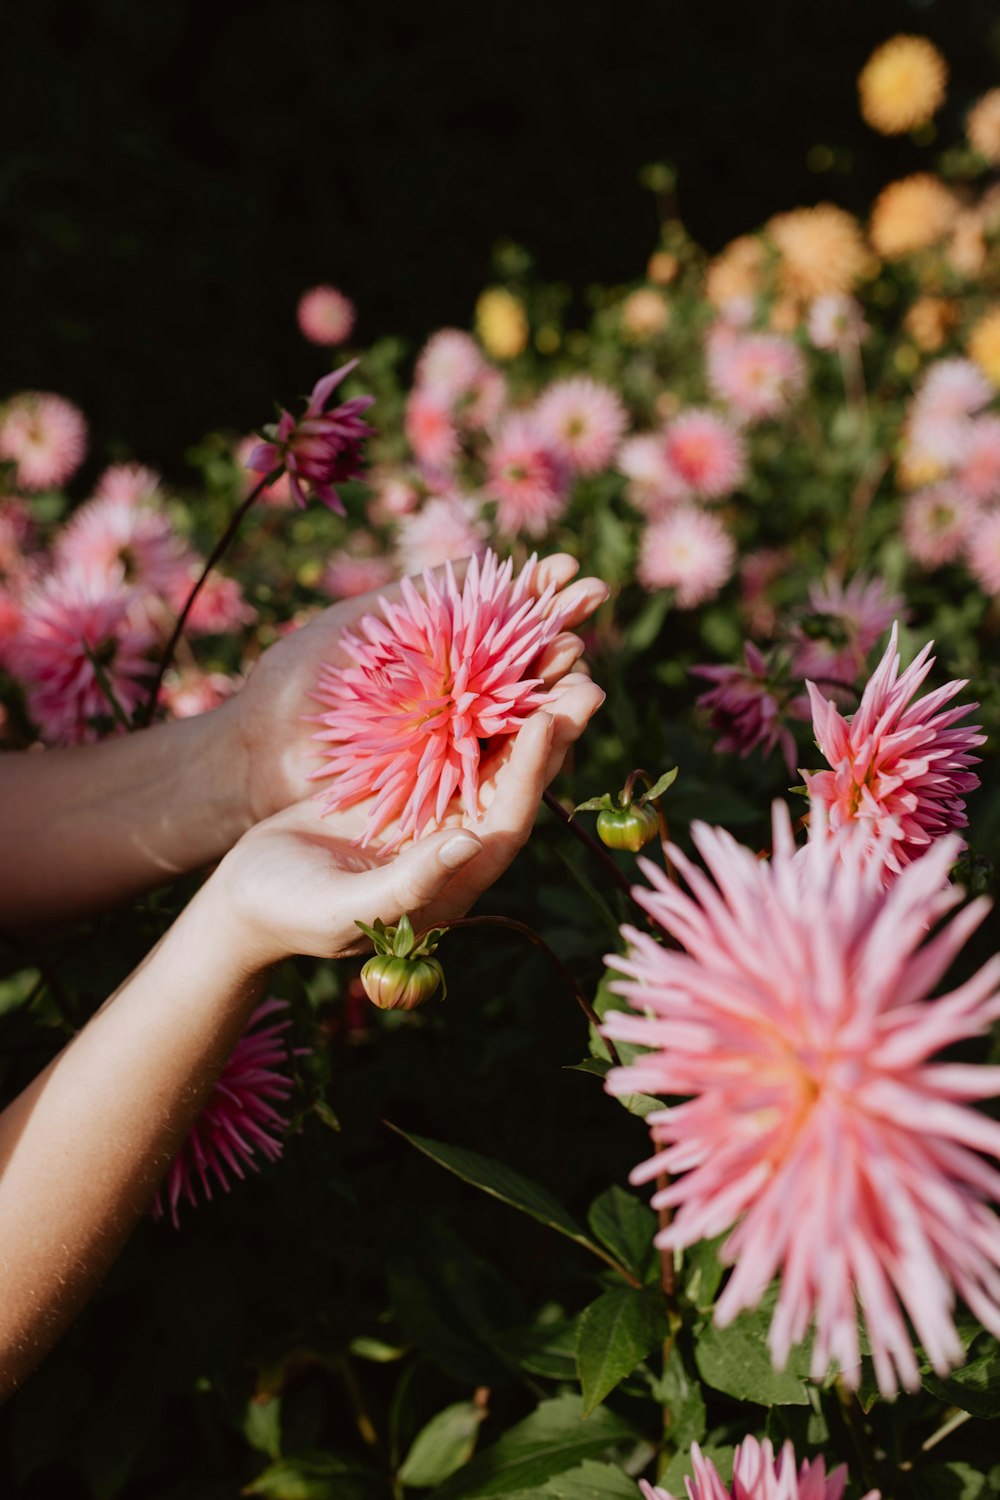 a person's hand reaching for a pink flower